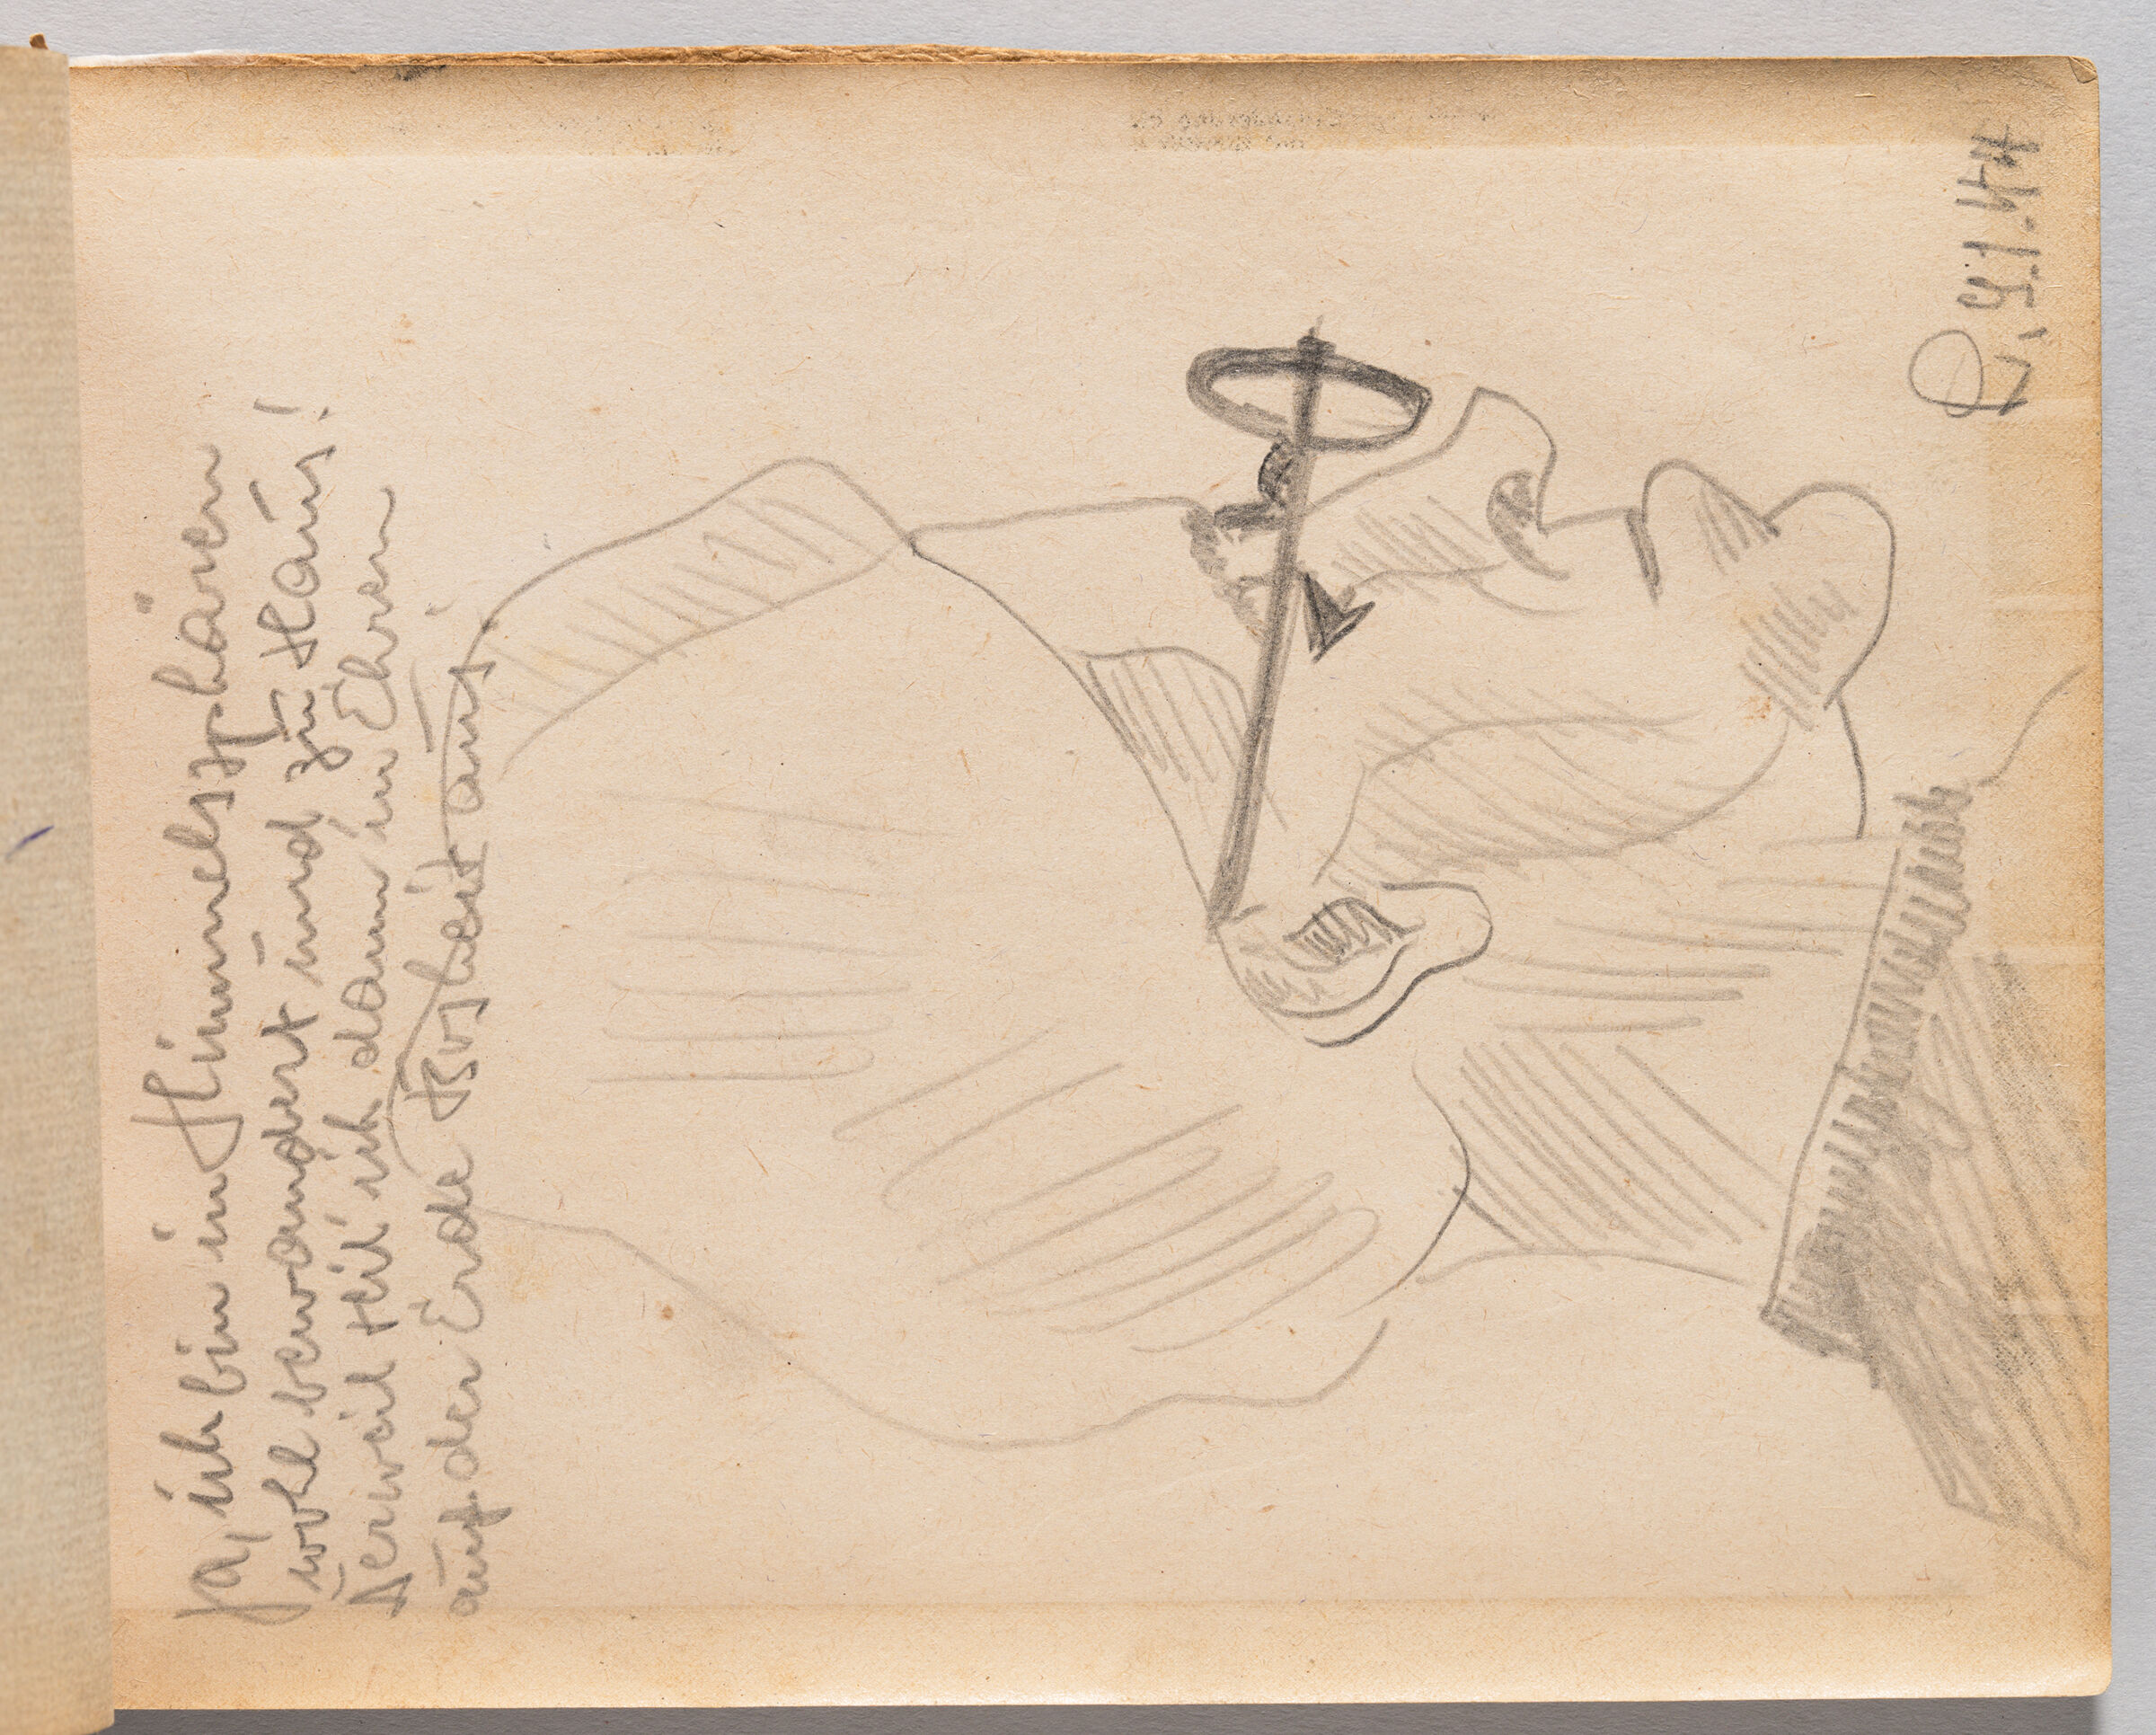 Untitled (Blank, Left Page); Untitled (Portrait Of Woman In Profile, Right Page)